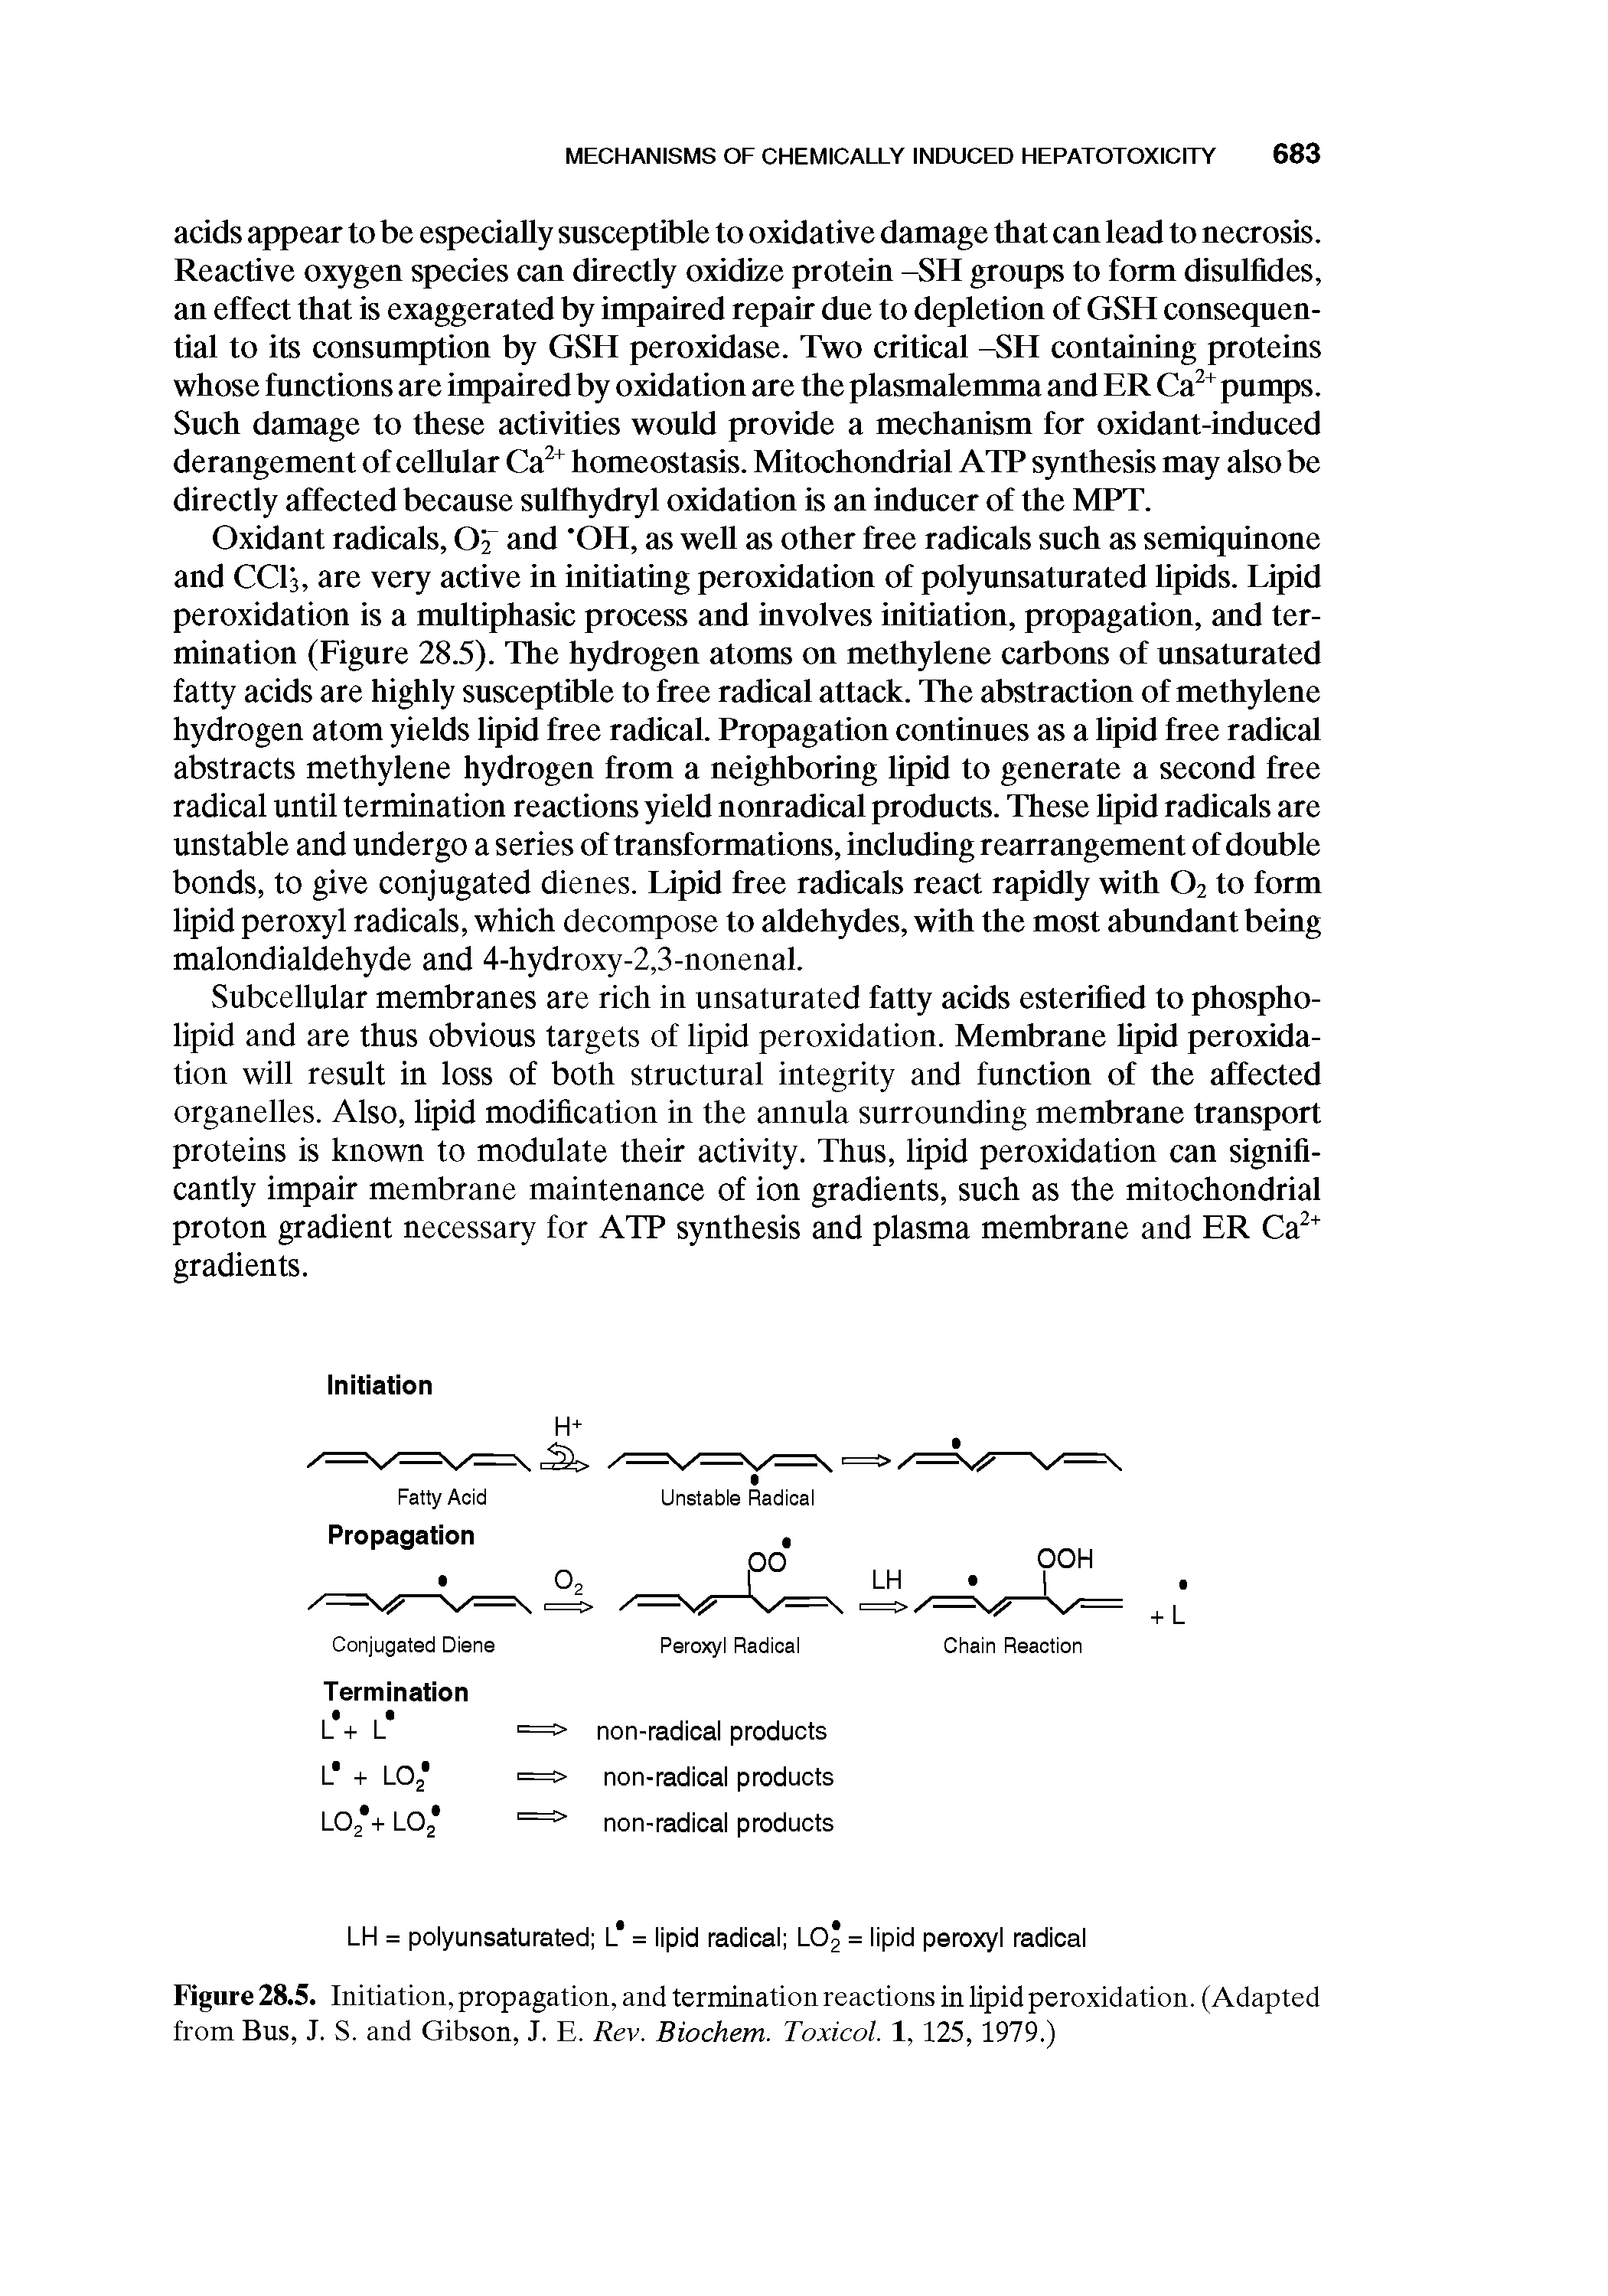 Figure 28.5. Initiation, propagation, and termination reactions in lipid peroxidation. (Adapted from Bus, J. S. and Gibson, J. E. Rev. Biochem. Toxicol. 1, 125, 1979.)...